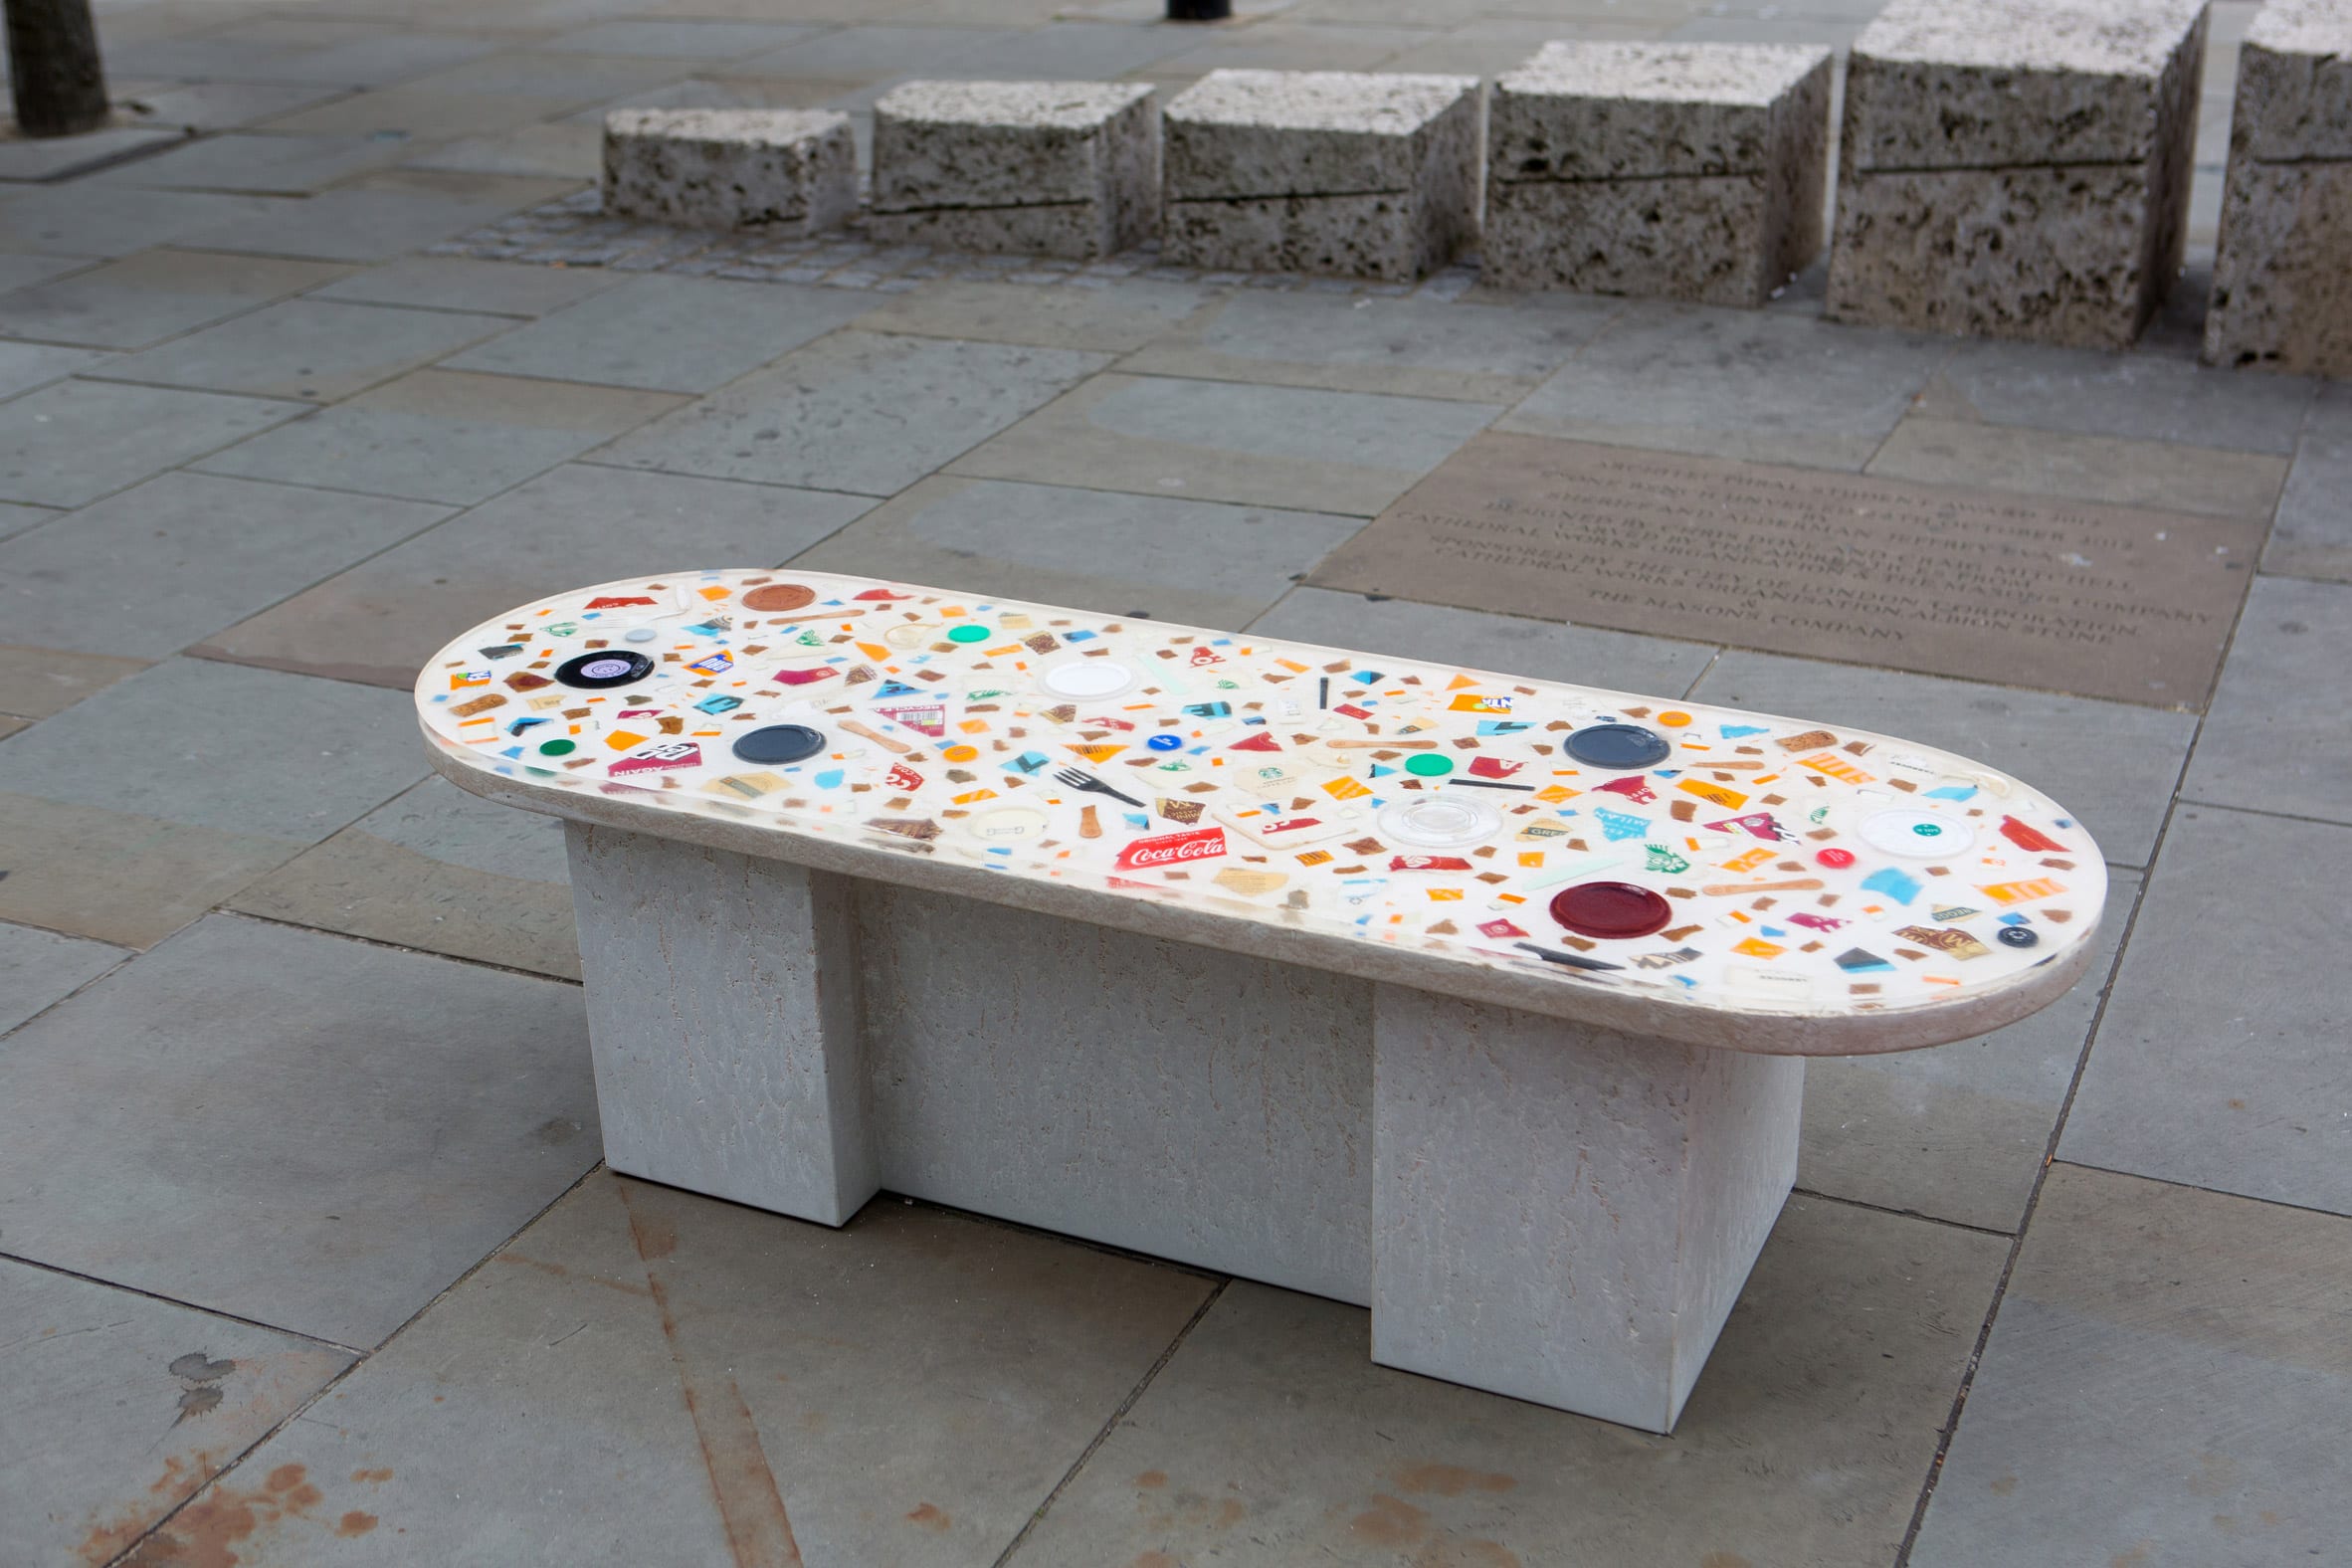 A public bench made with litter for LFA